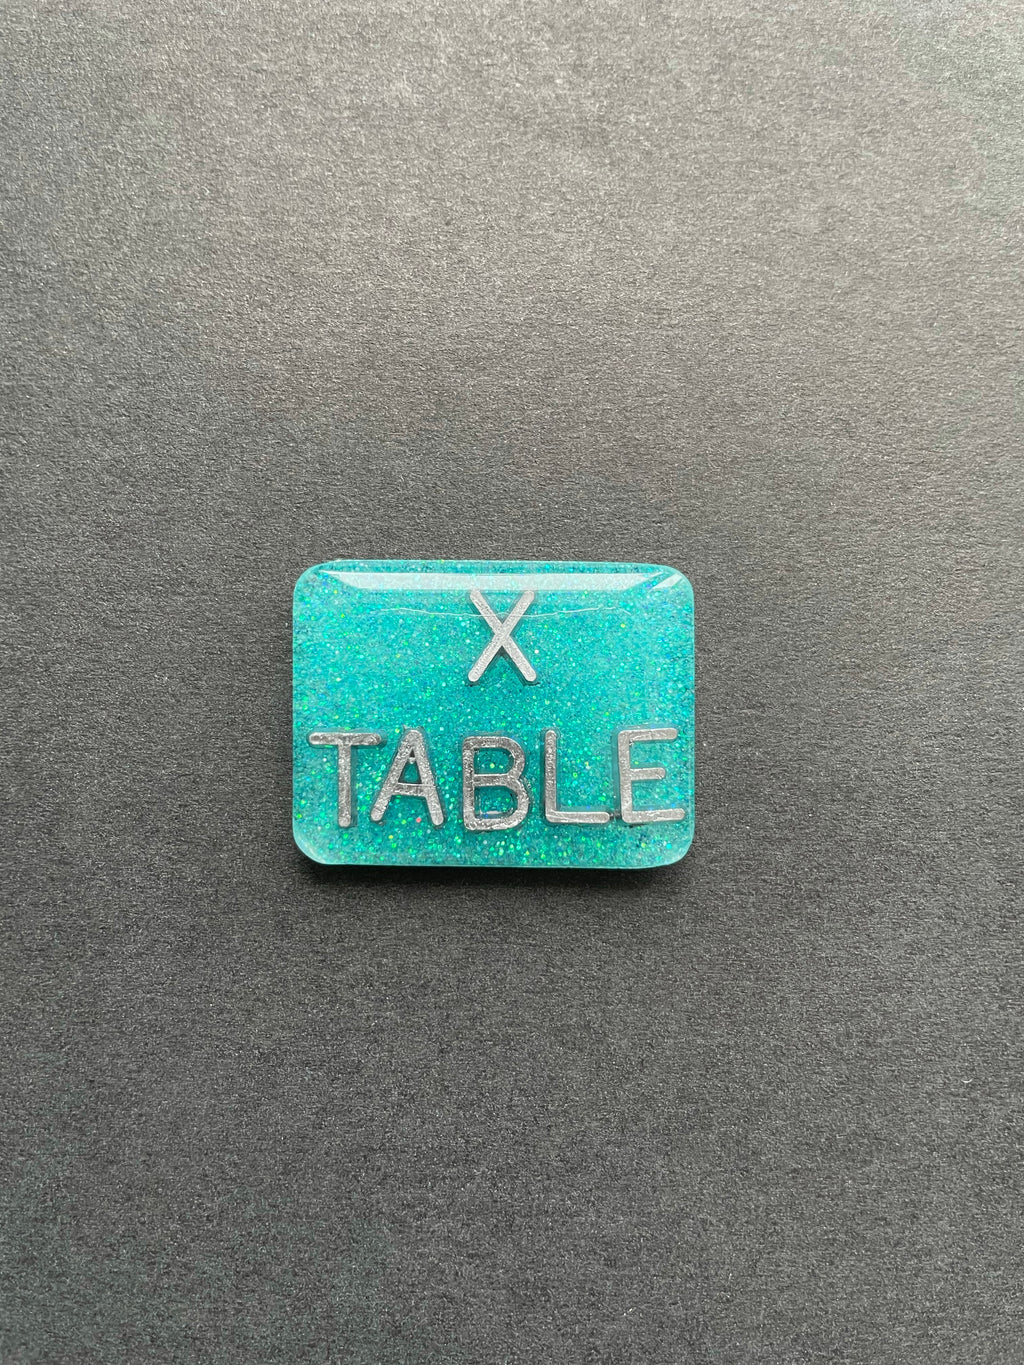 Cross Table Xray Marker, X Table Xray Markers, X-Table, Glitter, Rectangle, Word Xray Markers, Projection, Position